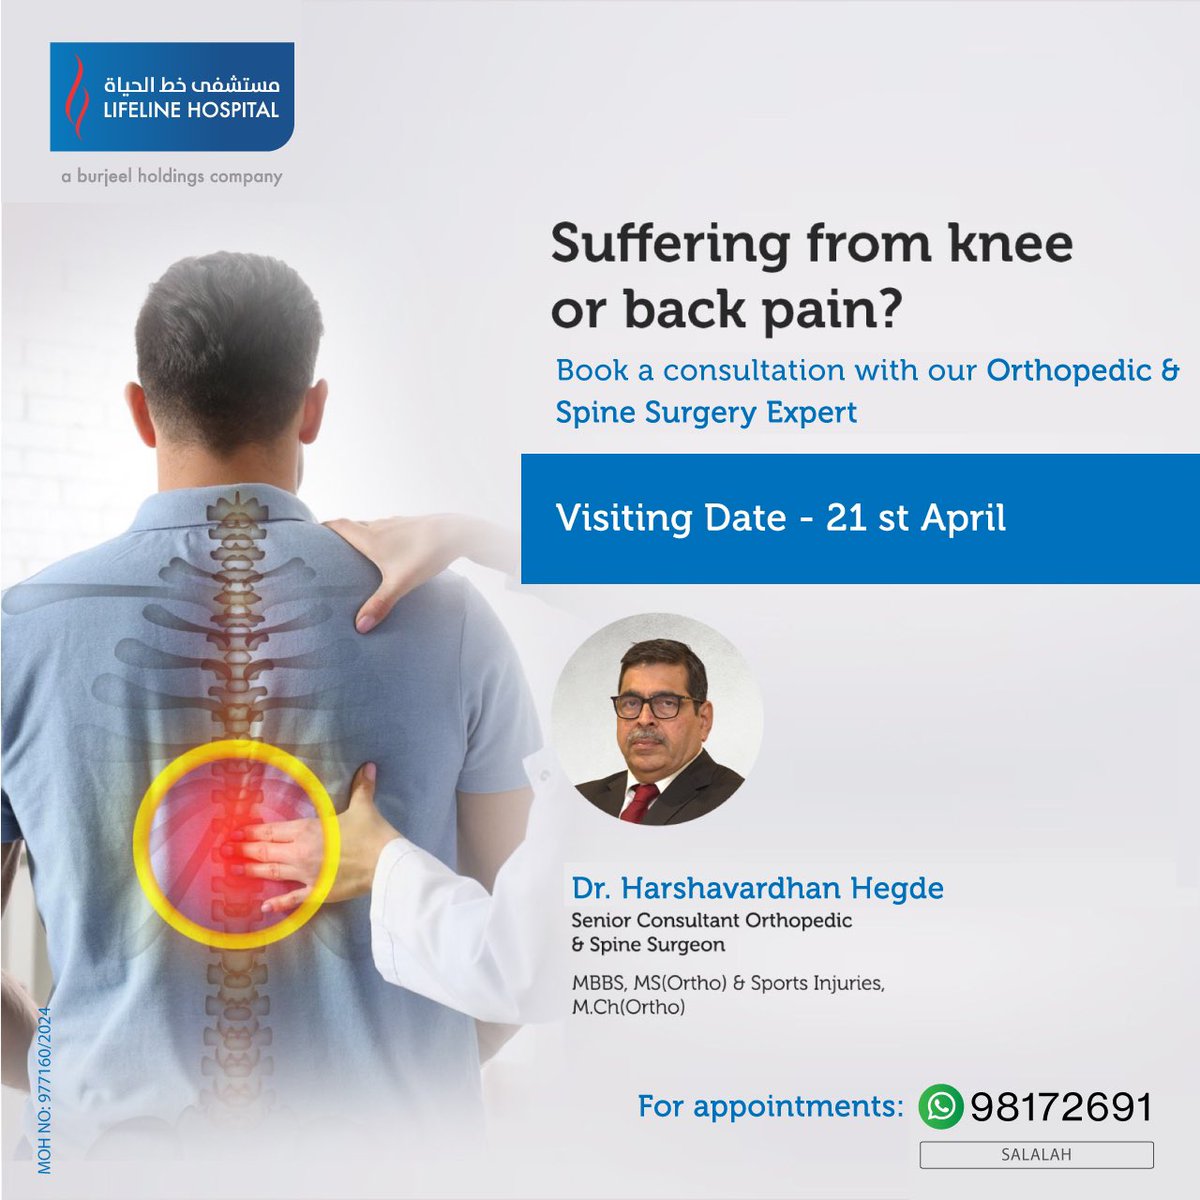 Avail Consultation from renowned Orthopedic & Spine Surgery expert from India, Dr. Harshavardhan Hegde at @lifelinehospital_salalah on 21st April,5pm-8pm. Prior booking required. For booking call 23212340 or send a WhatsApp message to 98172691. #orthopedicsurgery #orthopedics